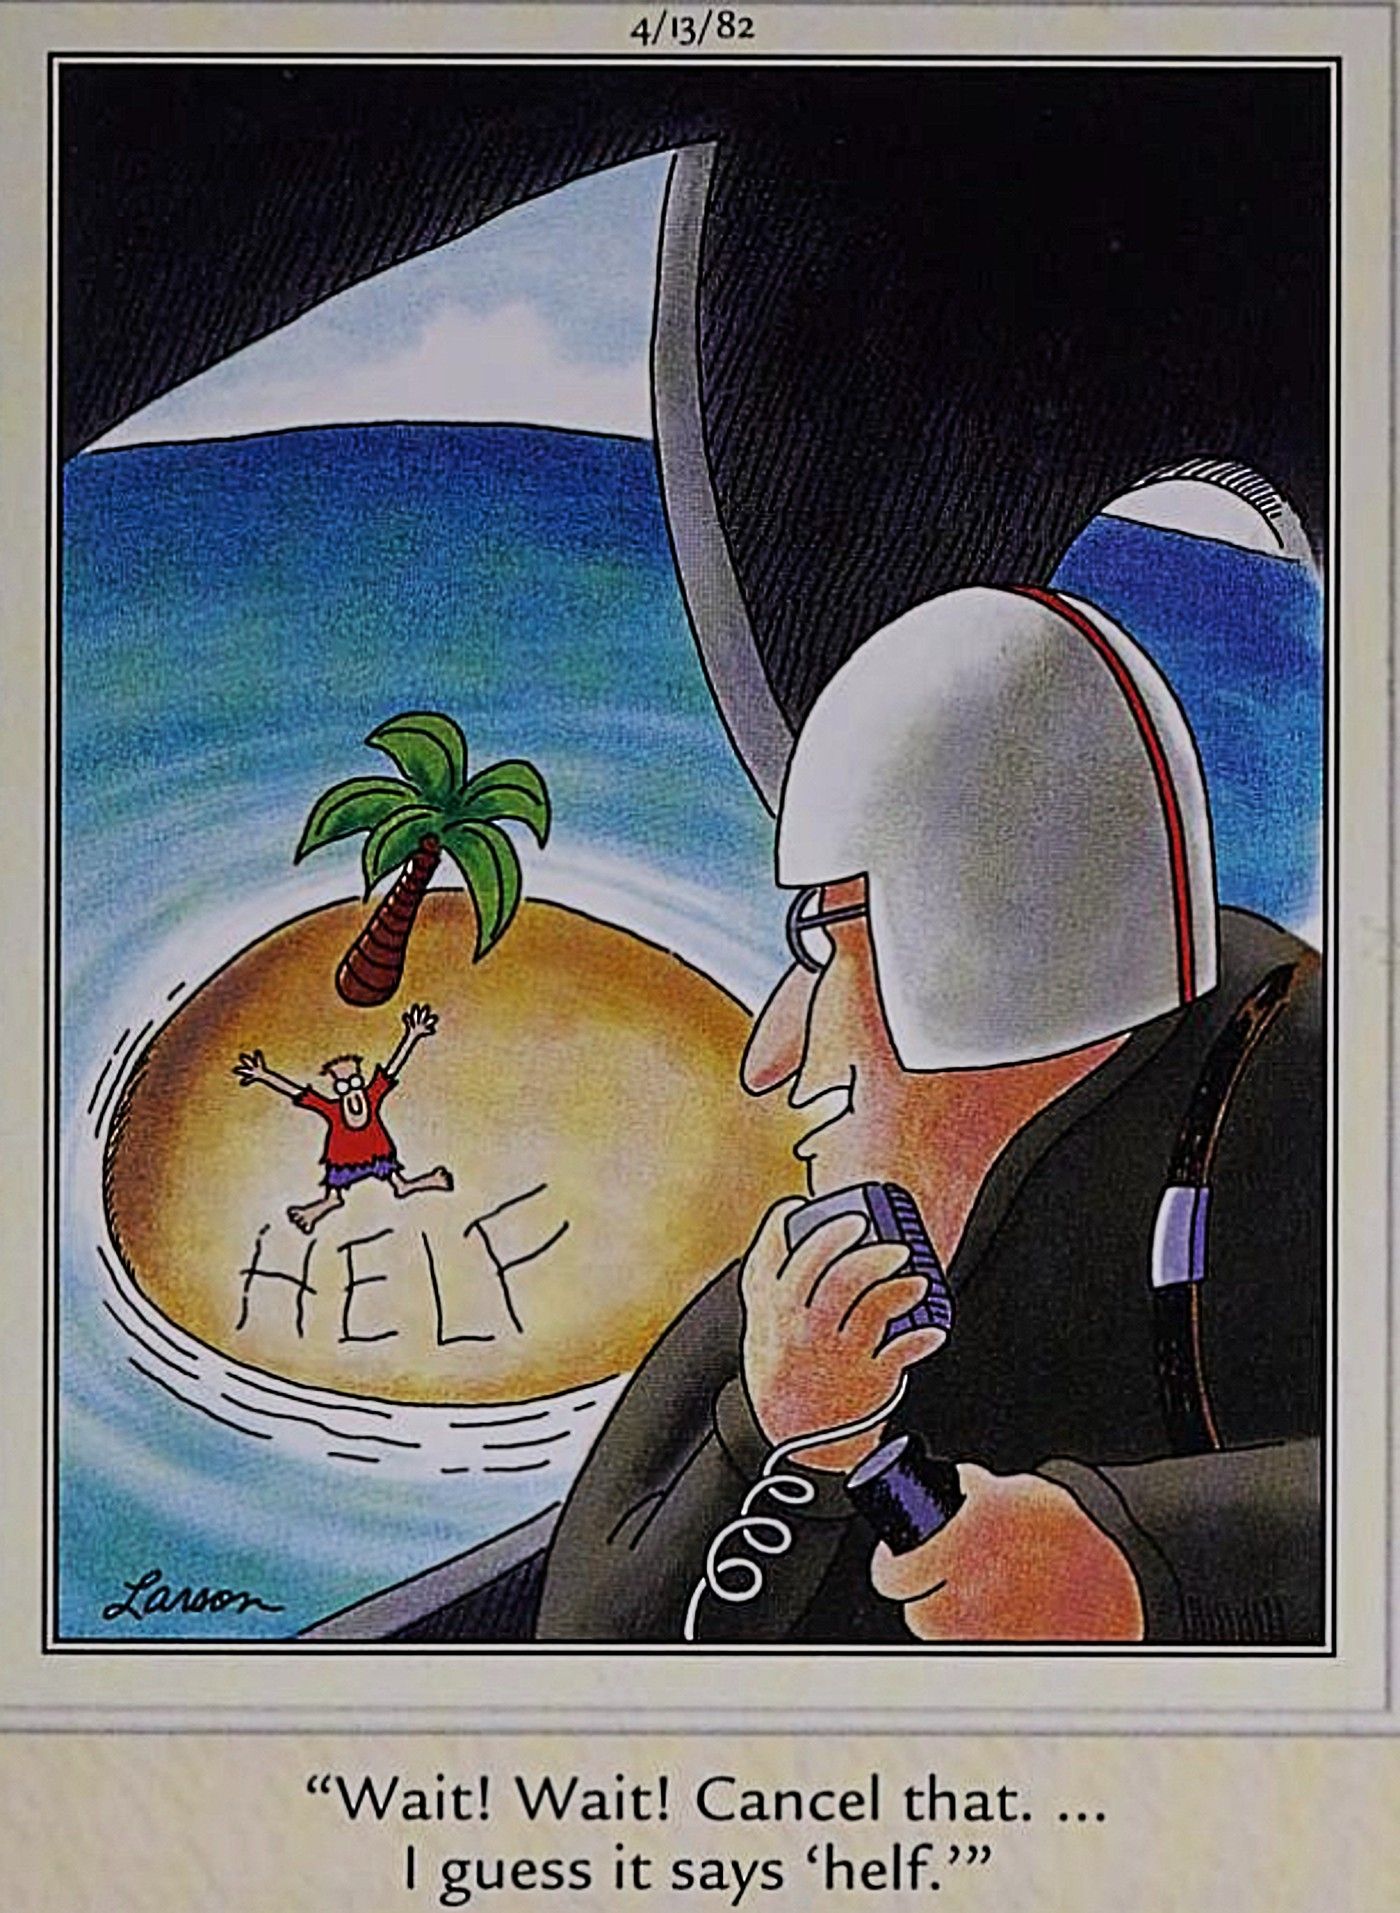 Far Side, pilot cancels rescue for man stranded on desert island because he only wrote HELF in sand